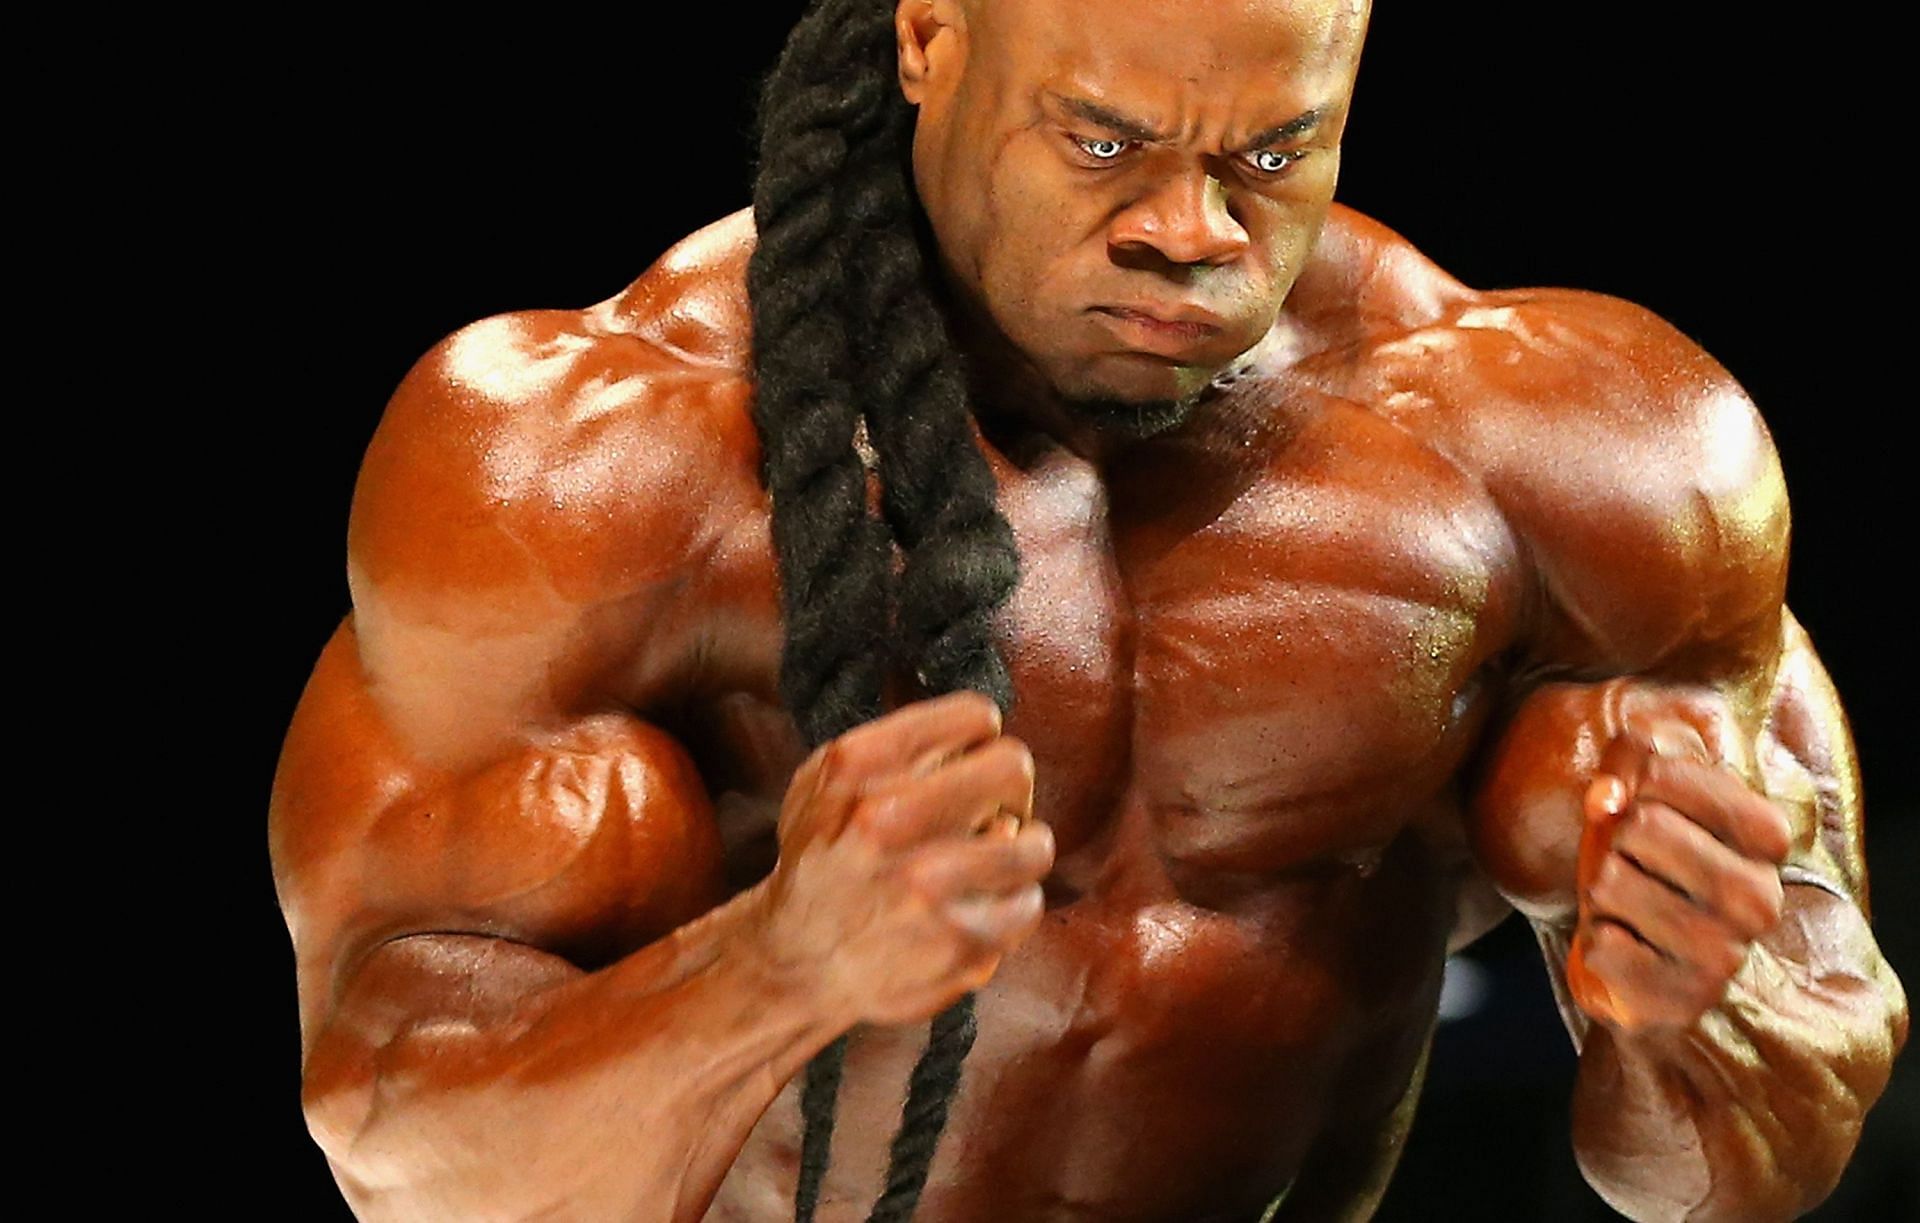 (Do these barbell exercises to get a strong chest like Kai Greene. Image via Getty/2016 Arnold Classic)